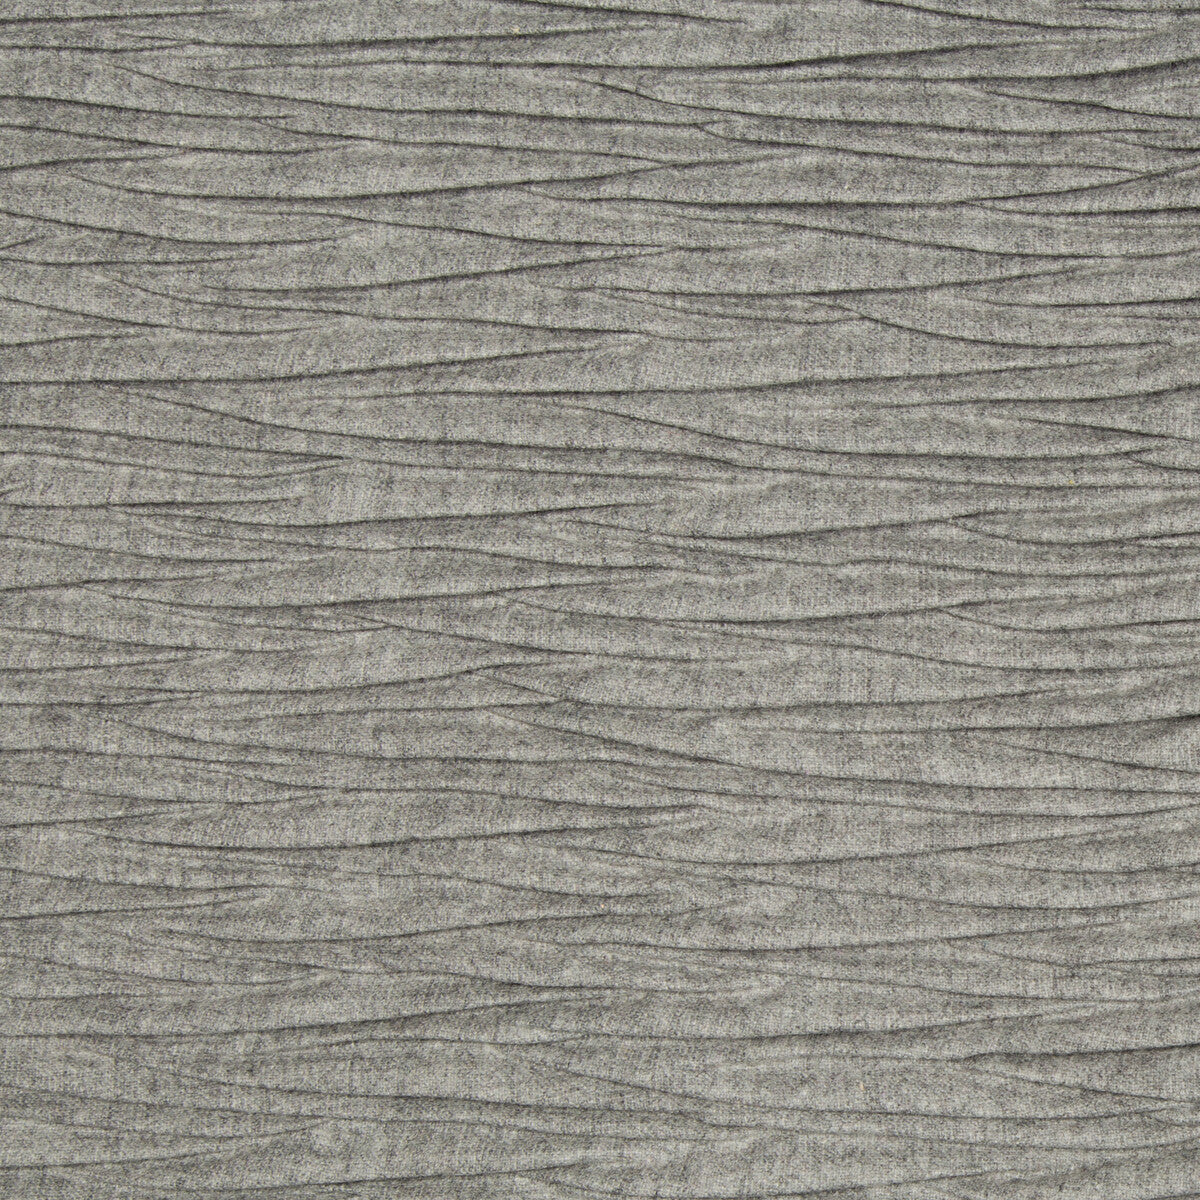 Layered Look fabric in grey heather color - pattern 34919.11.0 - by Kravet Couture in the Modern Tailor collection